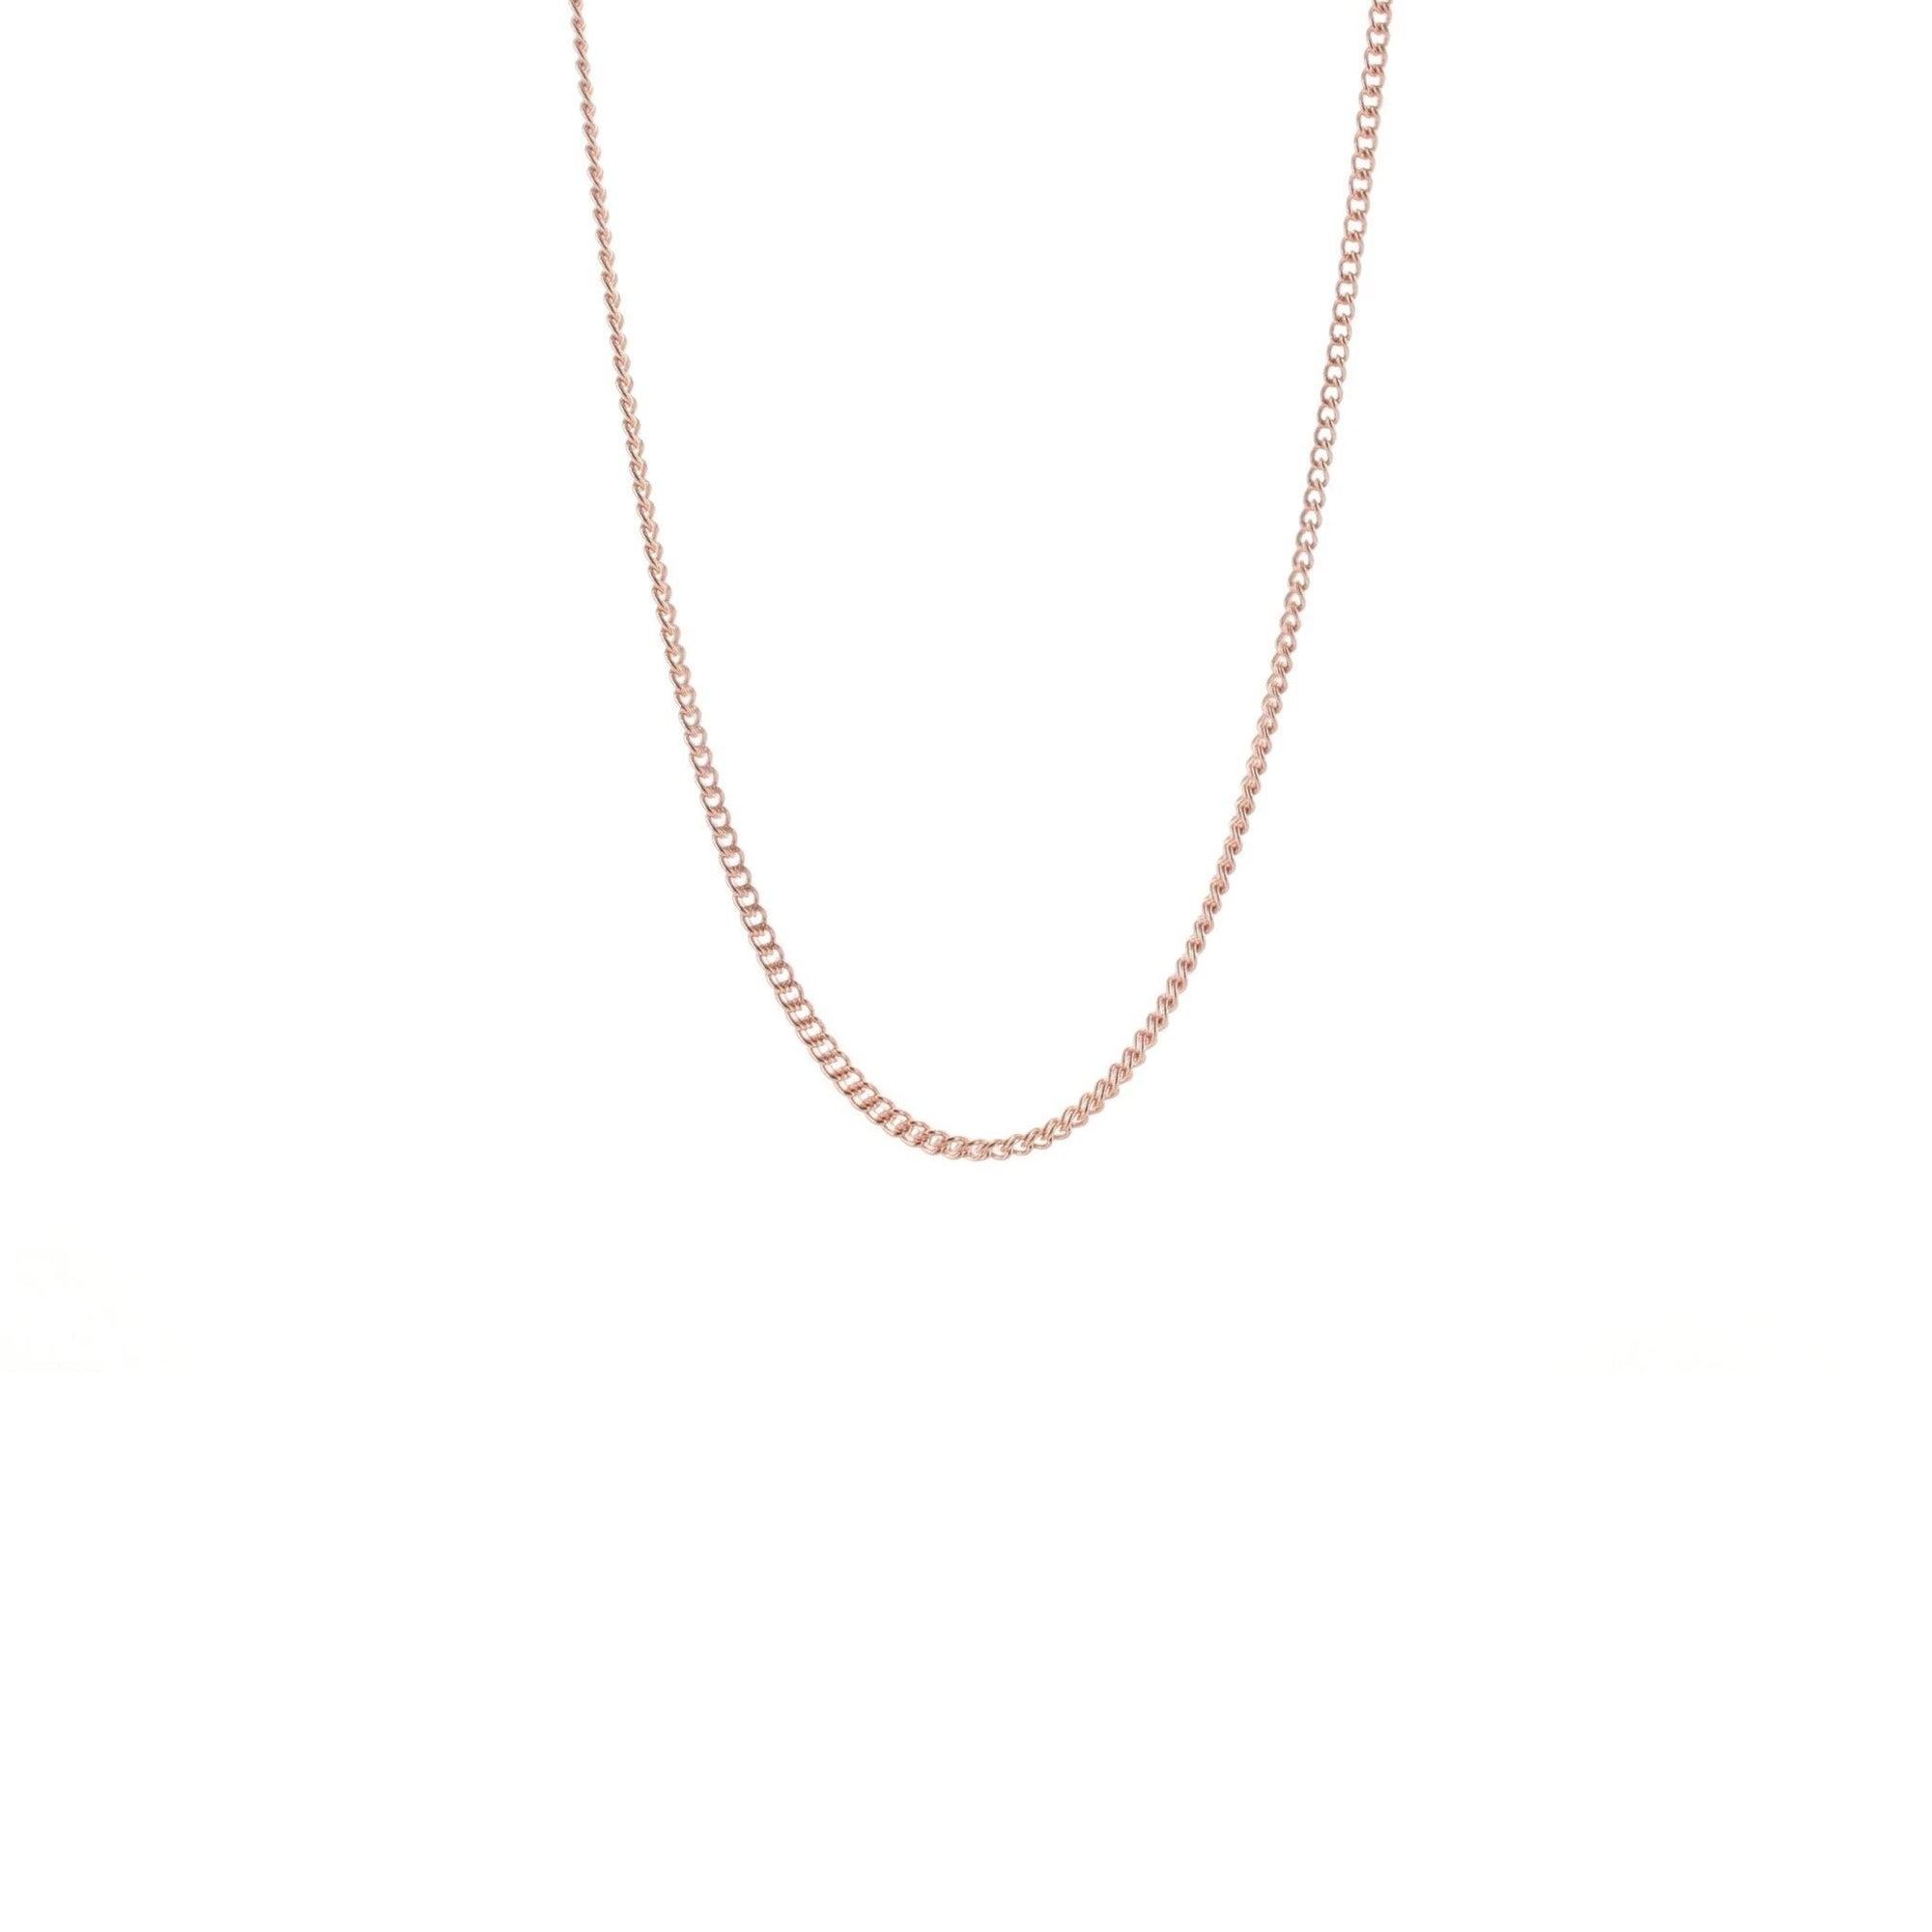 CHARMING 18-20" NECKLACE ROSE GOLD - SO PRETTY CARA COTTER